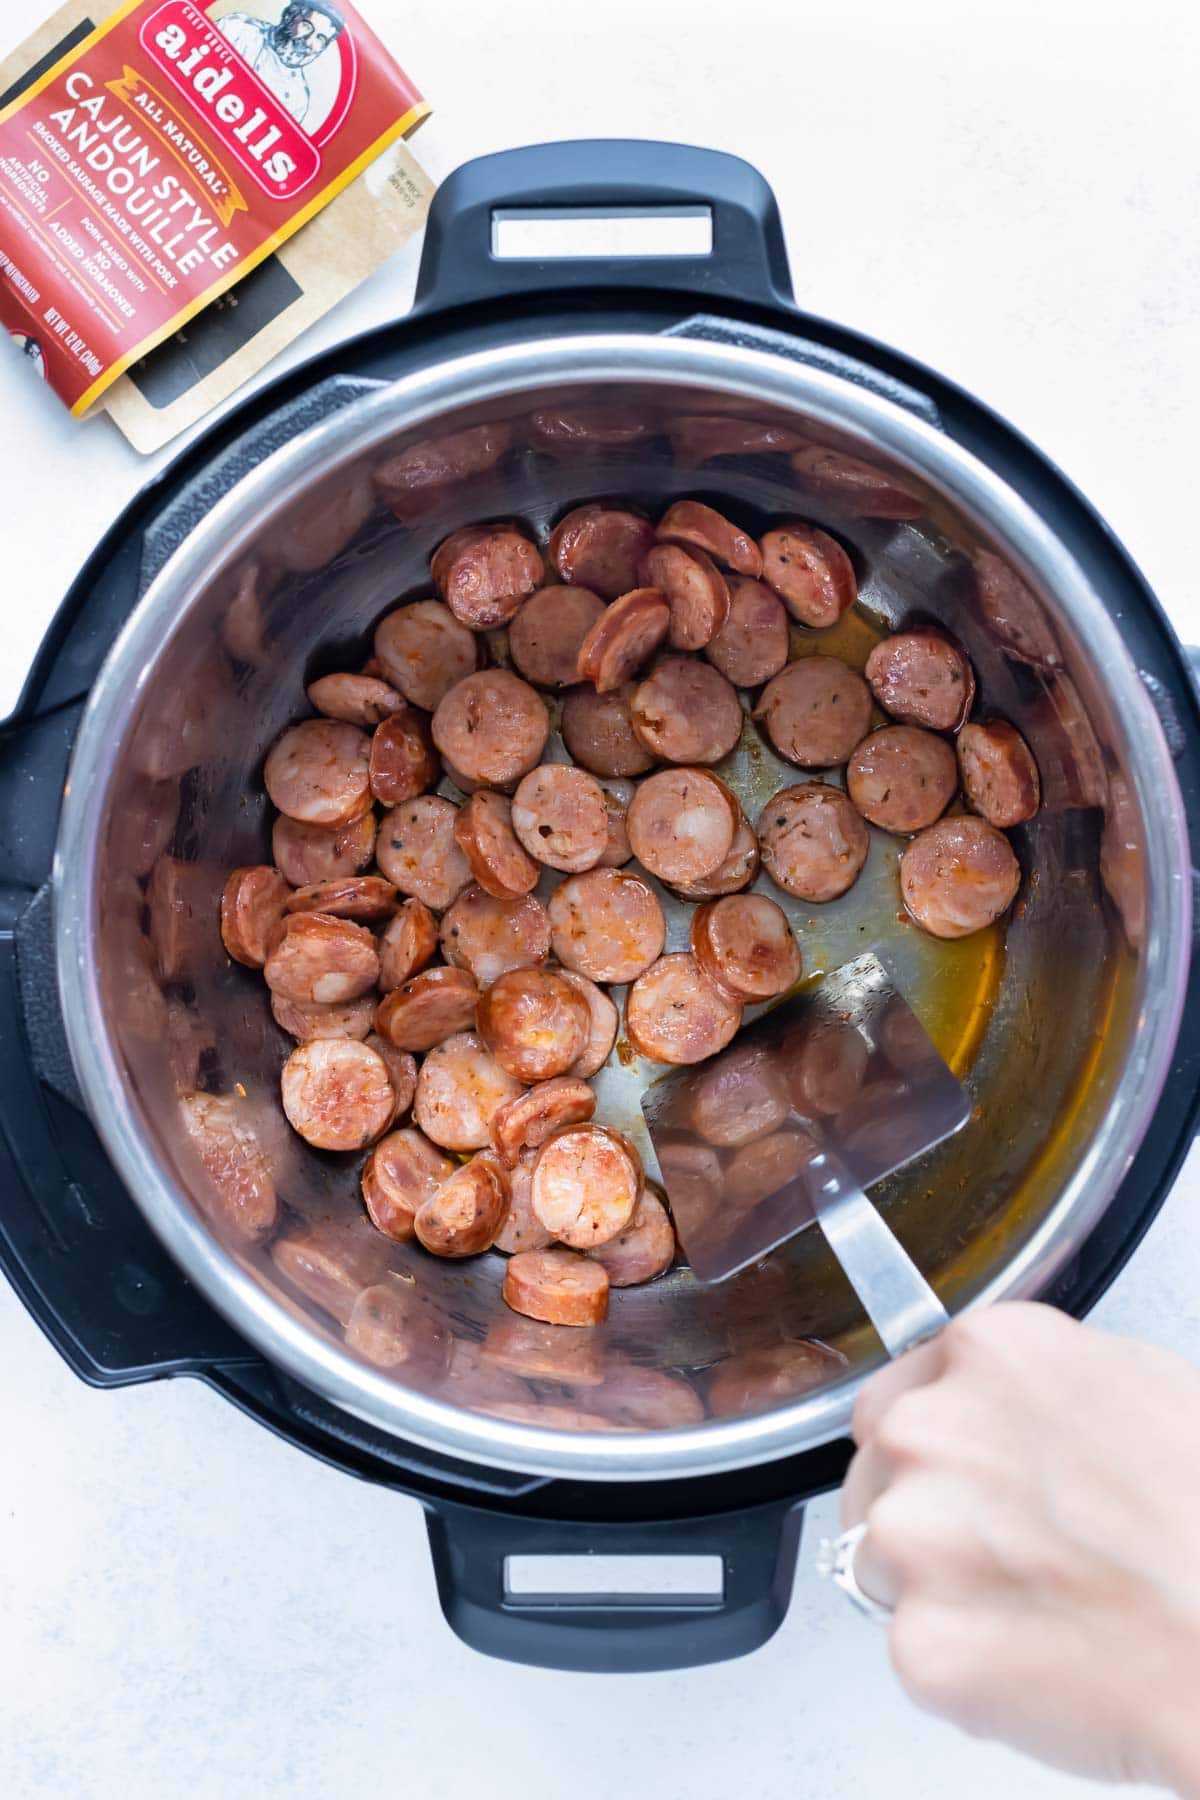 Sausage is cooked in the instant pot.